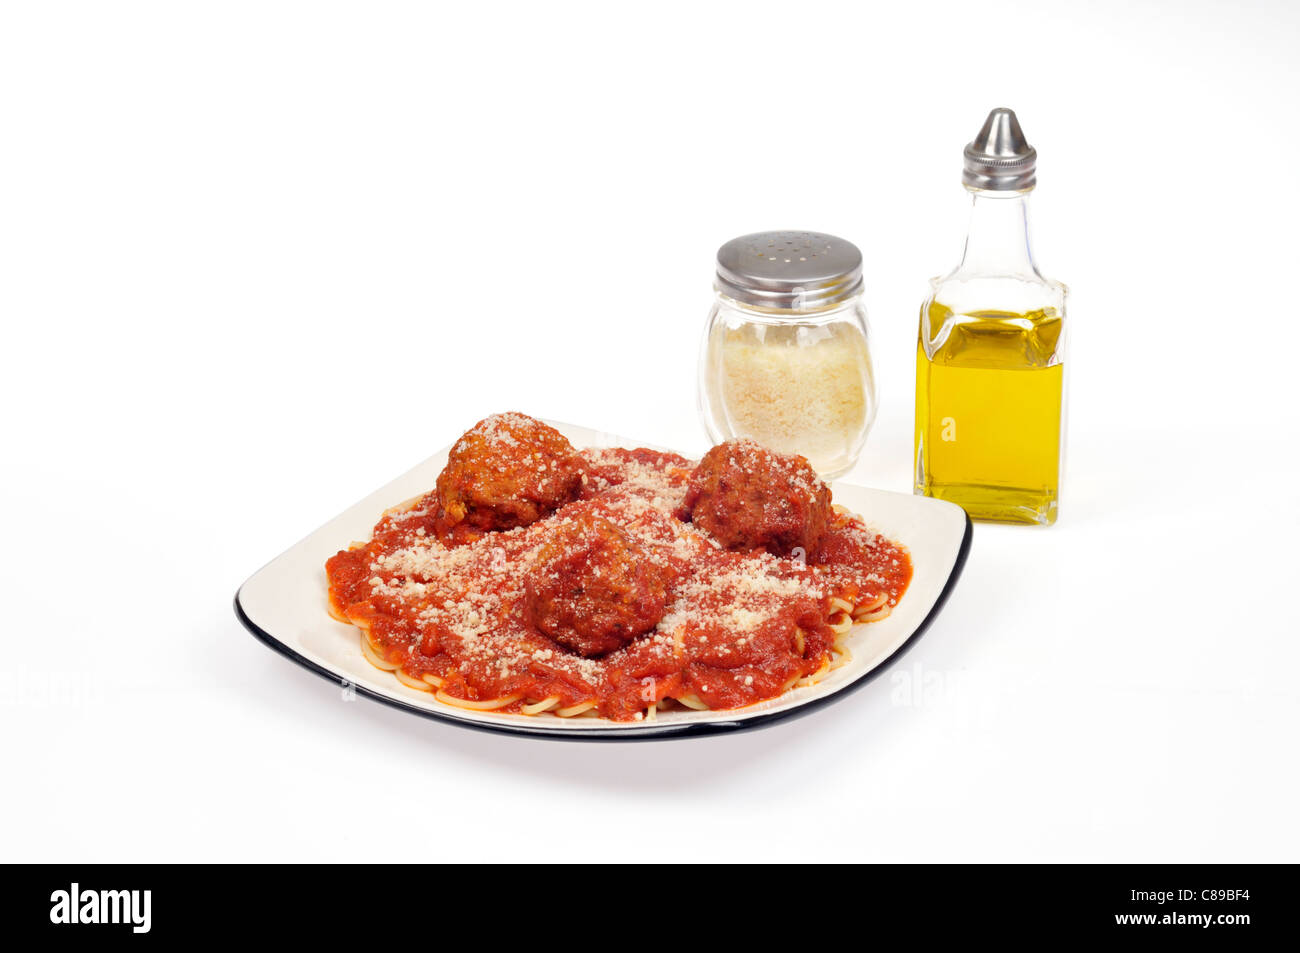 Meal of spaghetti and meatballs with tomato sauce and grated Parmesan cheese on plate on white background with jars of olive oil and cheese. Stock Photo